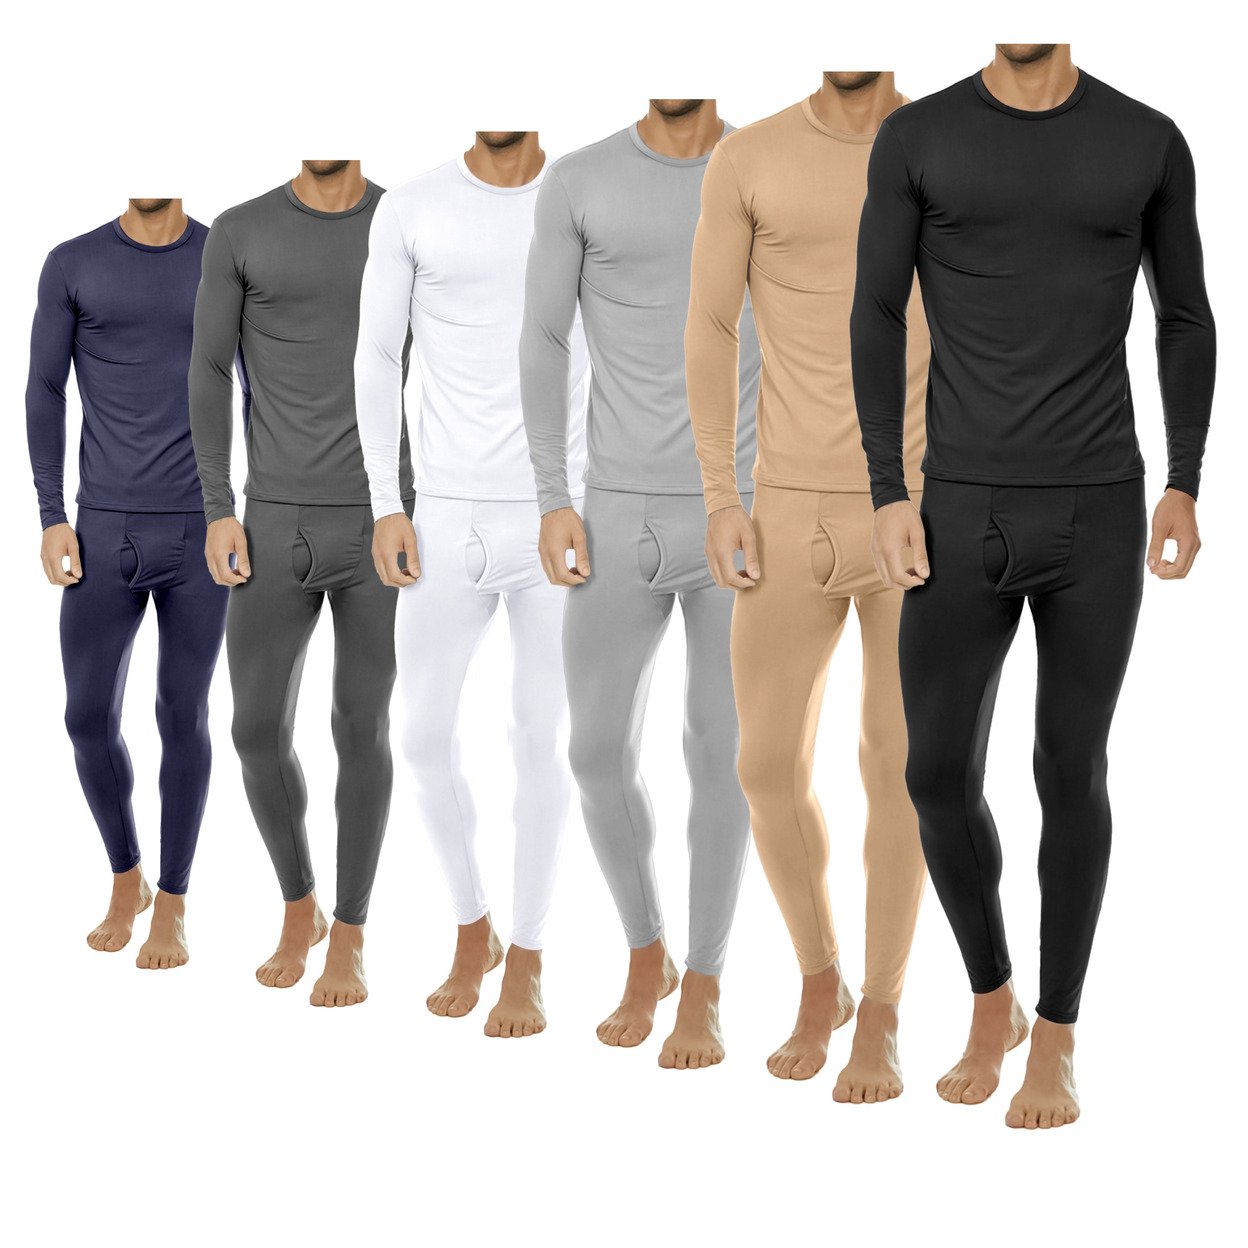 2-Sets: Men's Winter Warm Fleece Lined Thermal Underwear Set For Cold Weather - White&navy, X-large